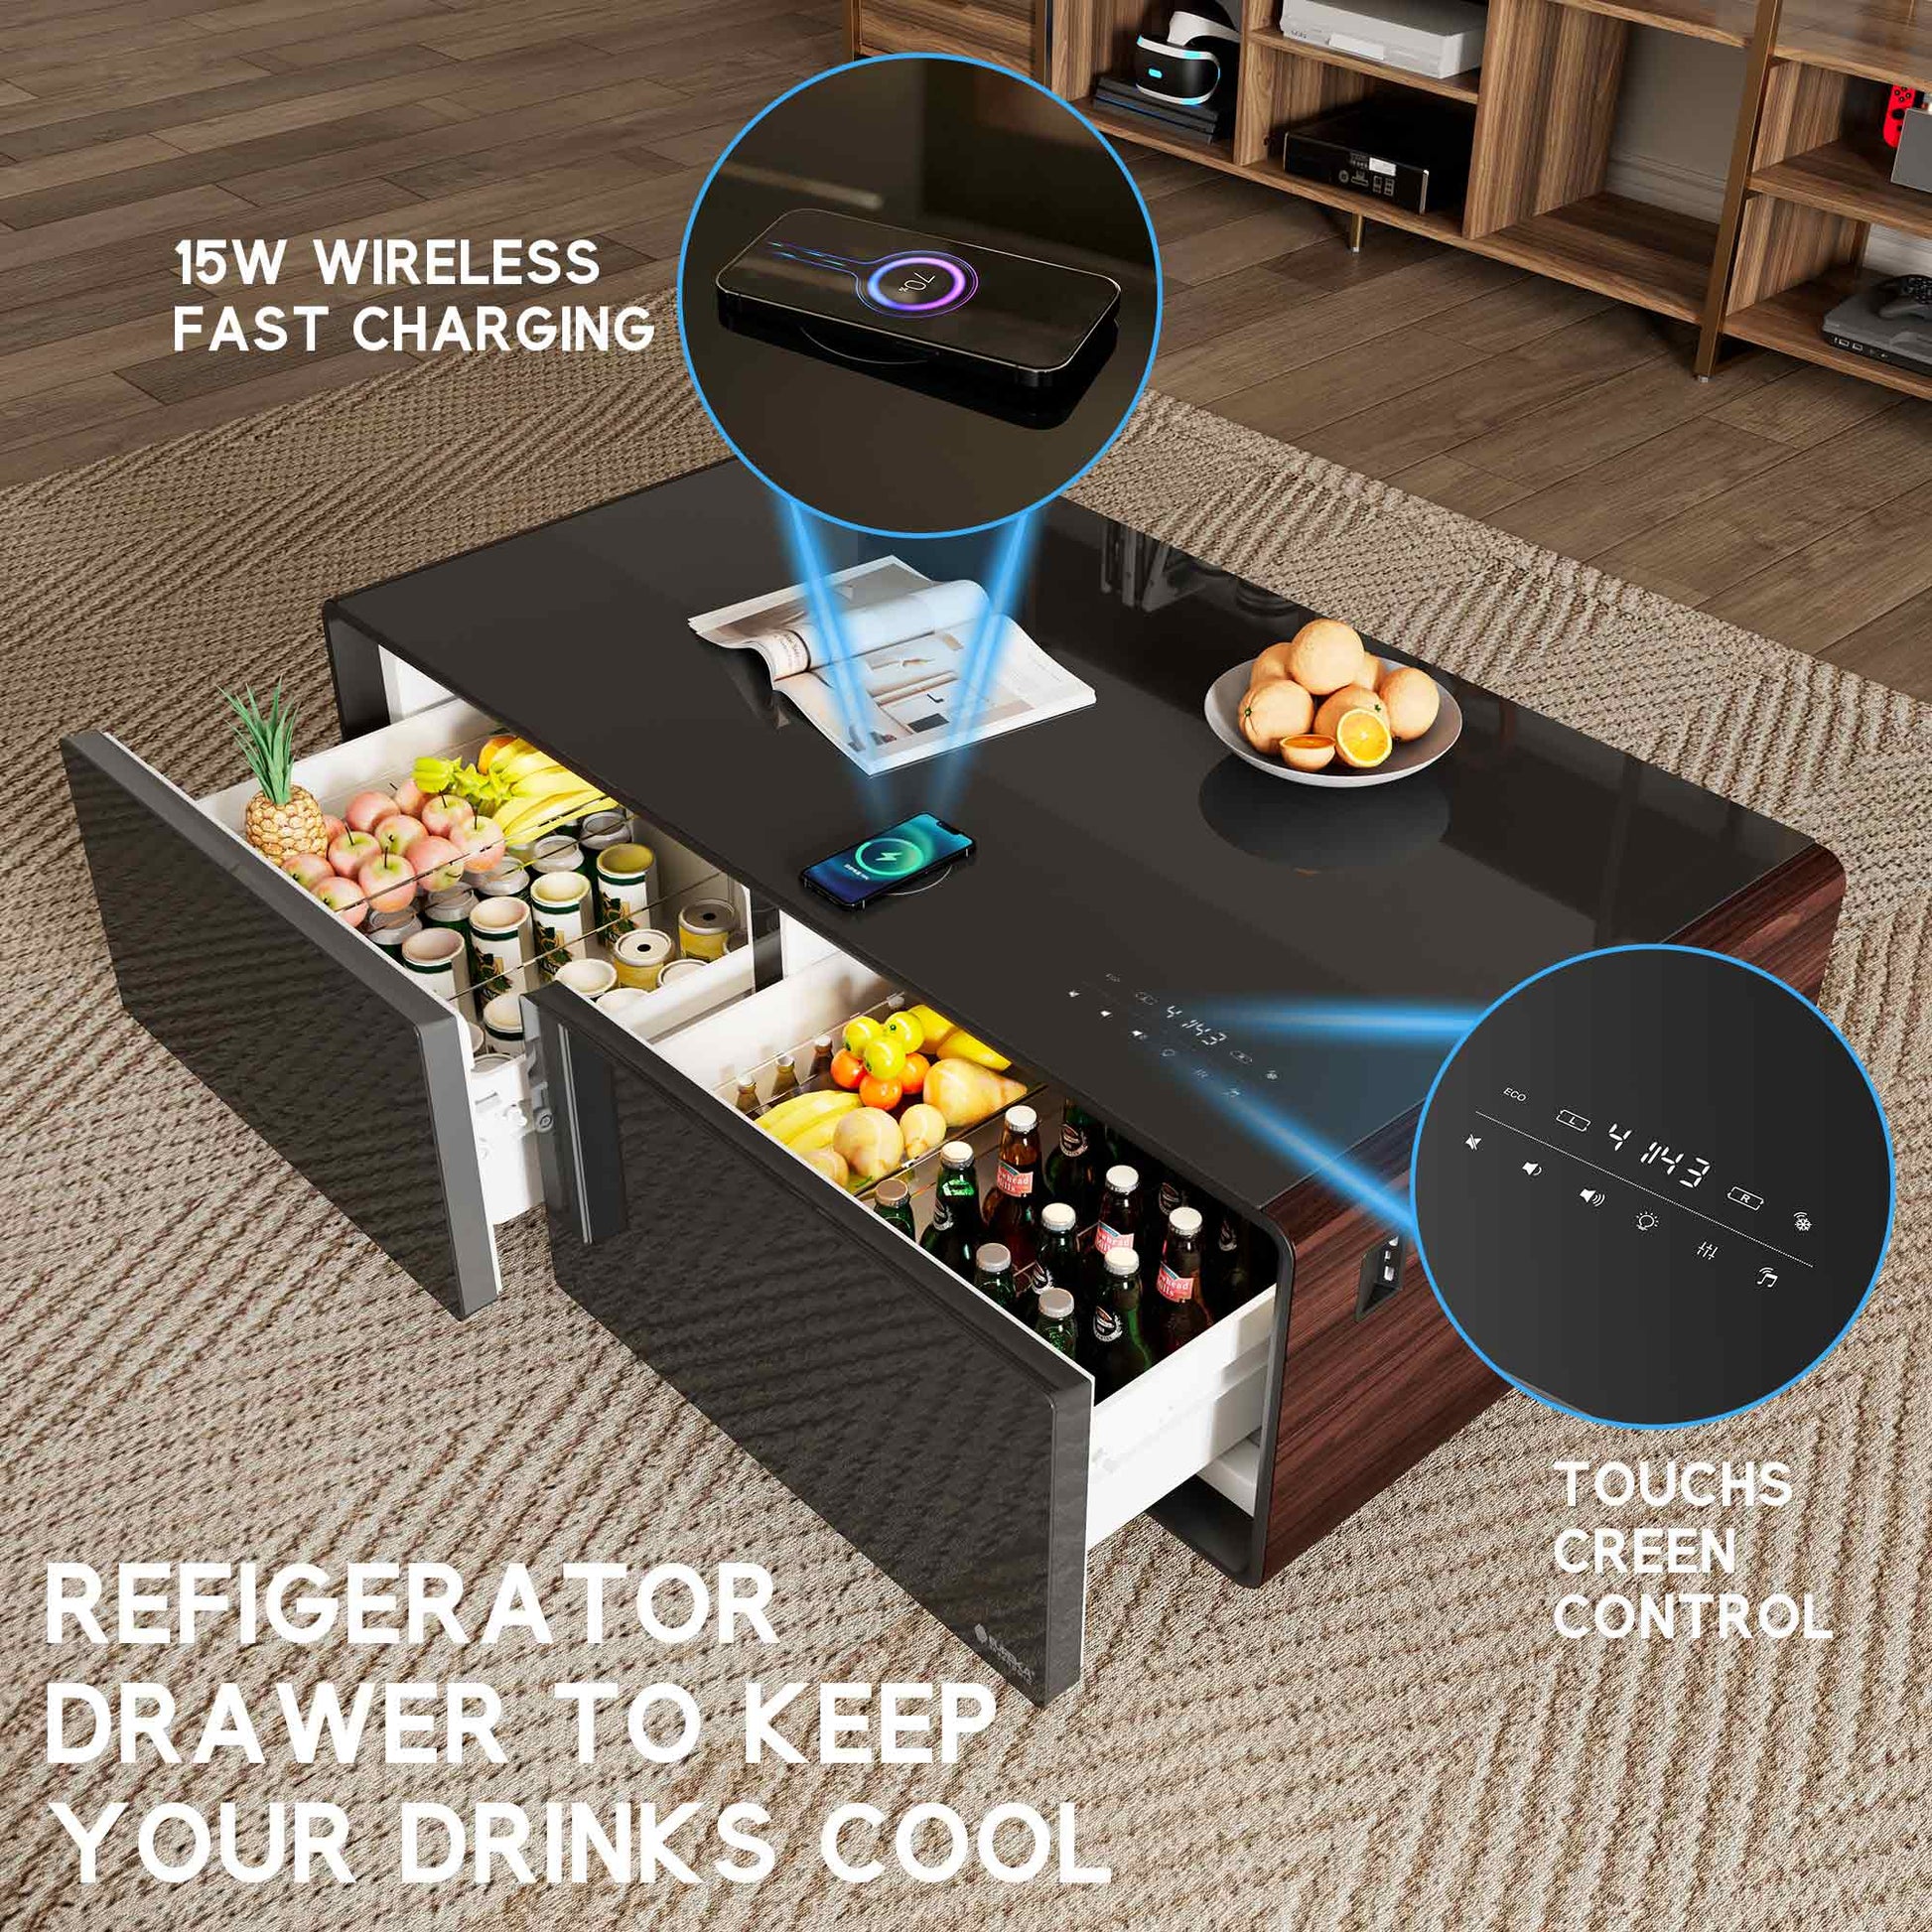 50 inch Walnut Woodgrain Style Smart Fridge Coffee Table with Bluetooth Speakers, Touch Screen Controls, 15W Wireless Fast Charging